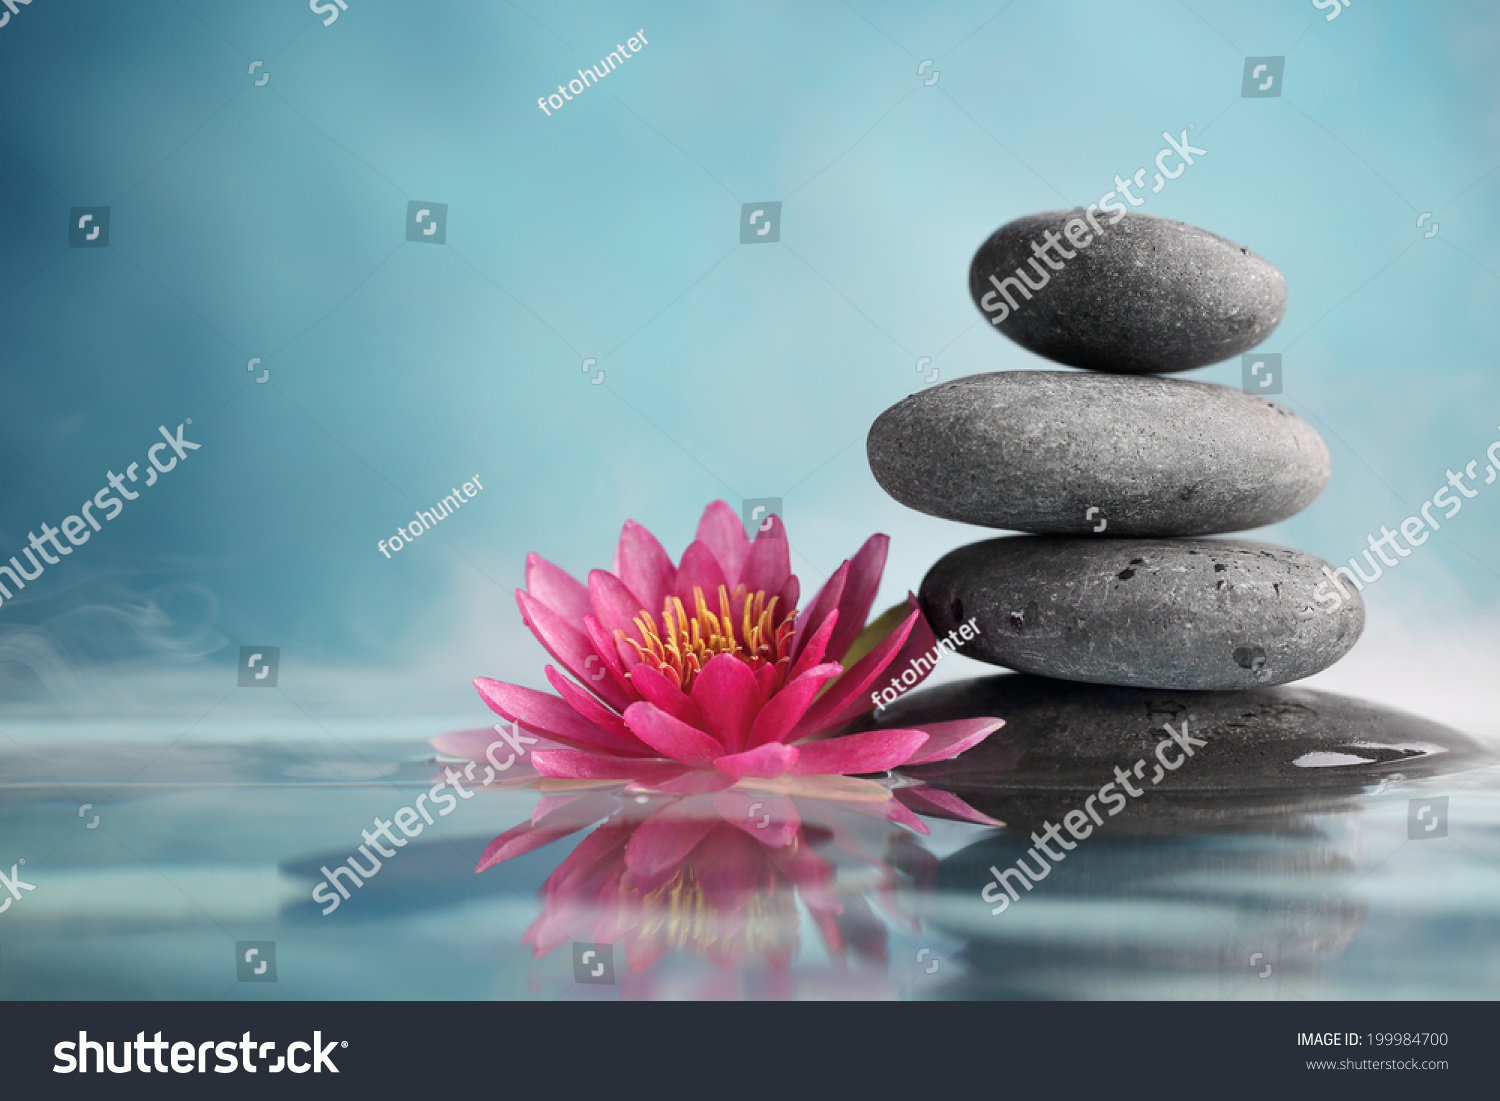 Spa still life with water lily and zen stone in a serenity pool #199984700